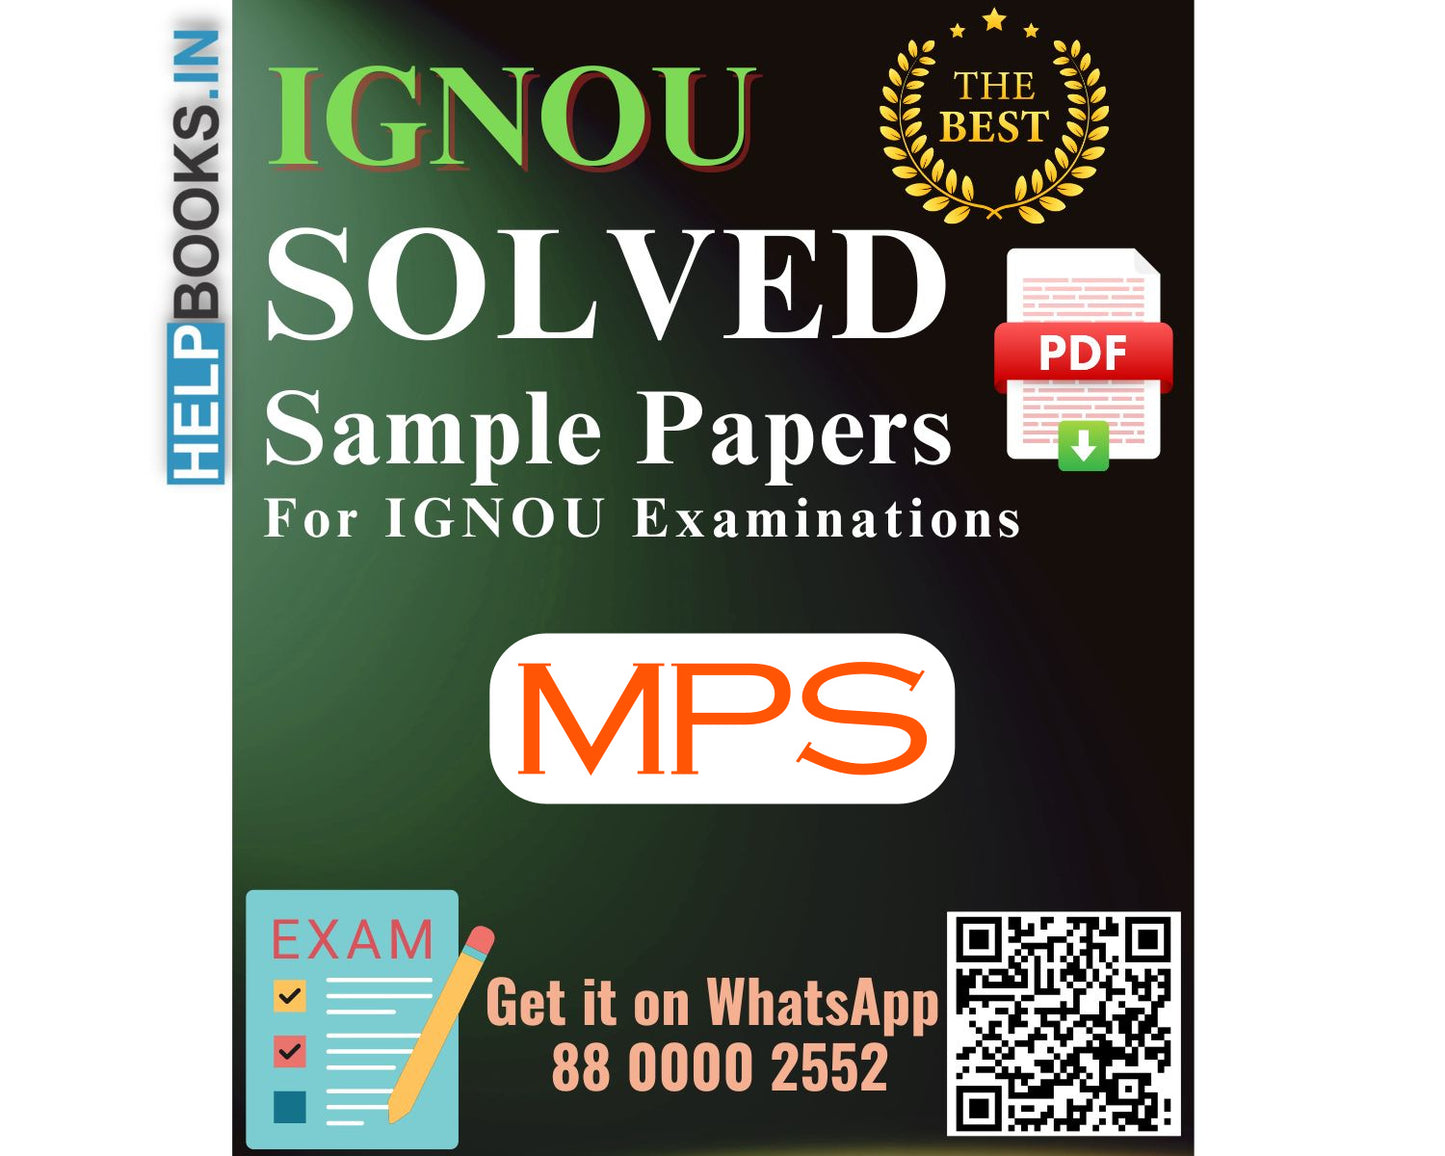 IGNOU Master of Arts (Political Science) (MPS) | Solved Sample Papers for Exams